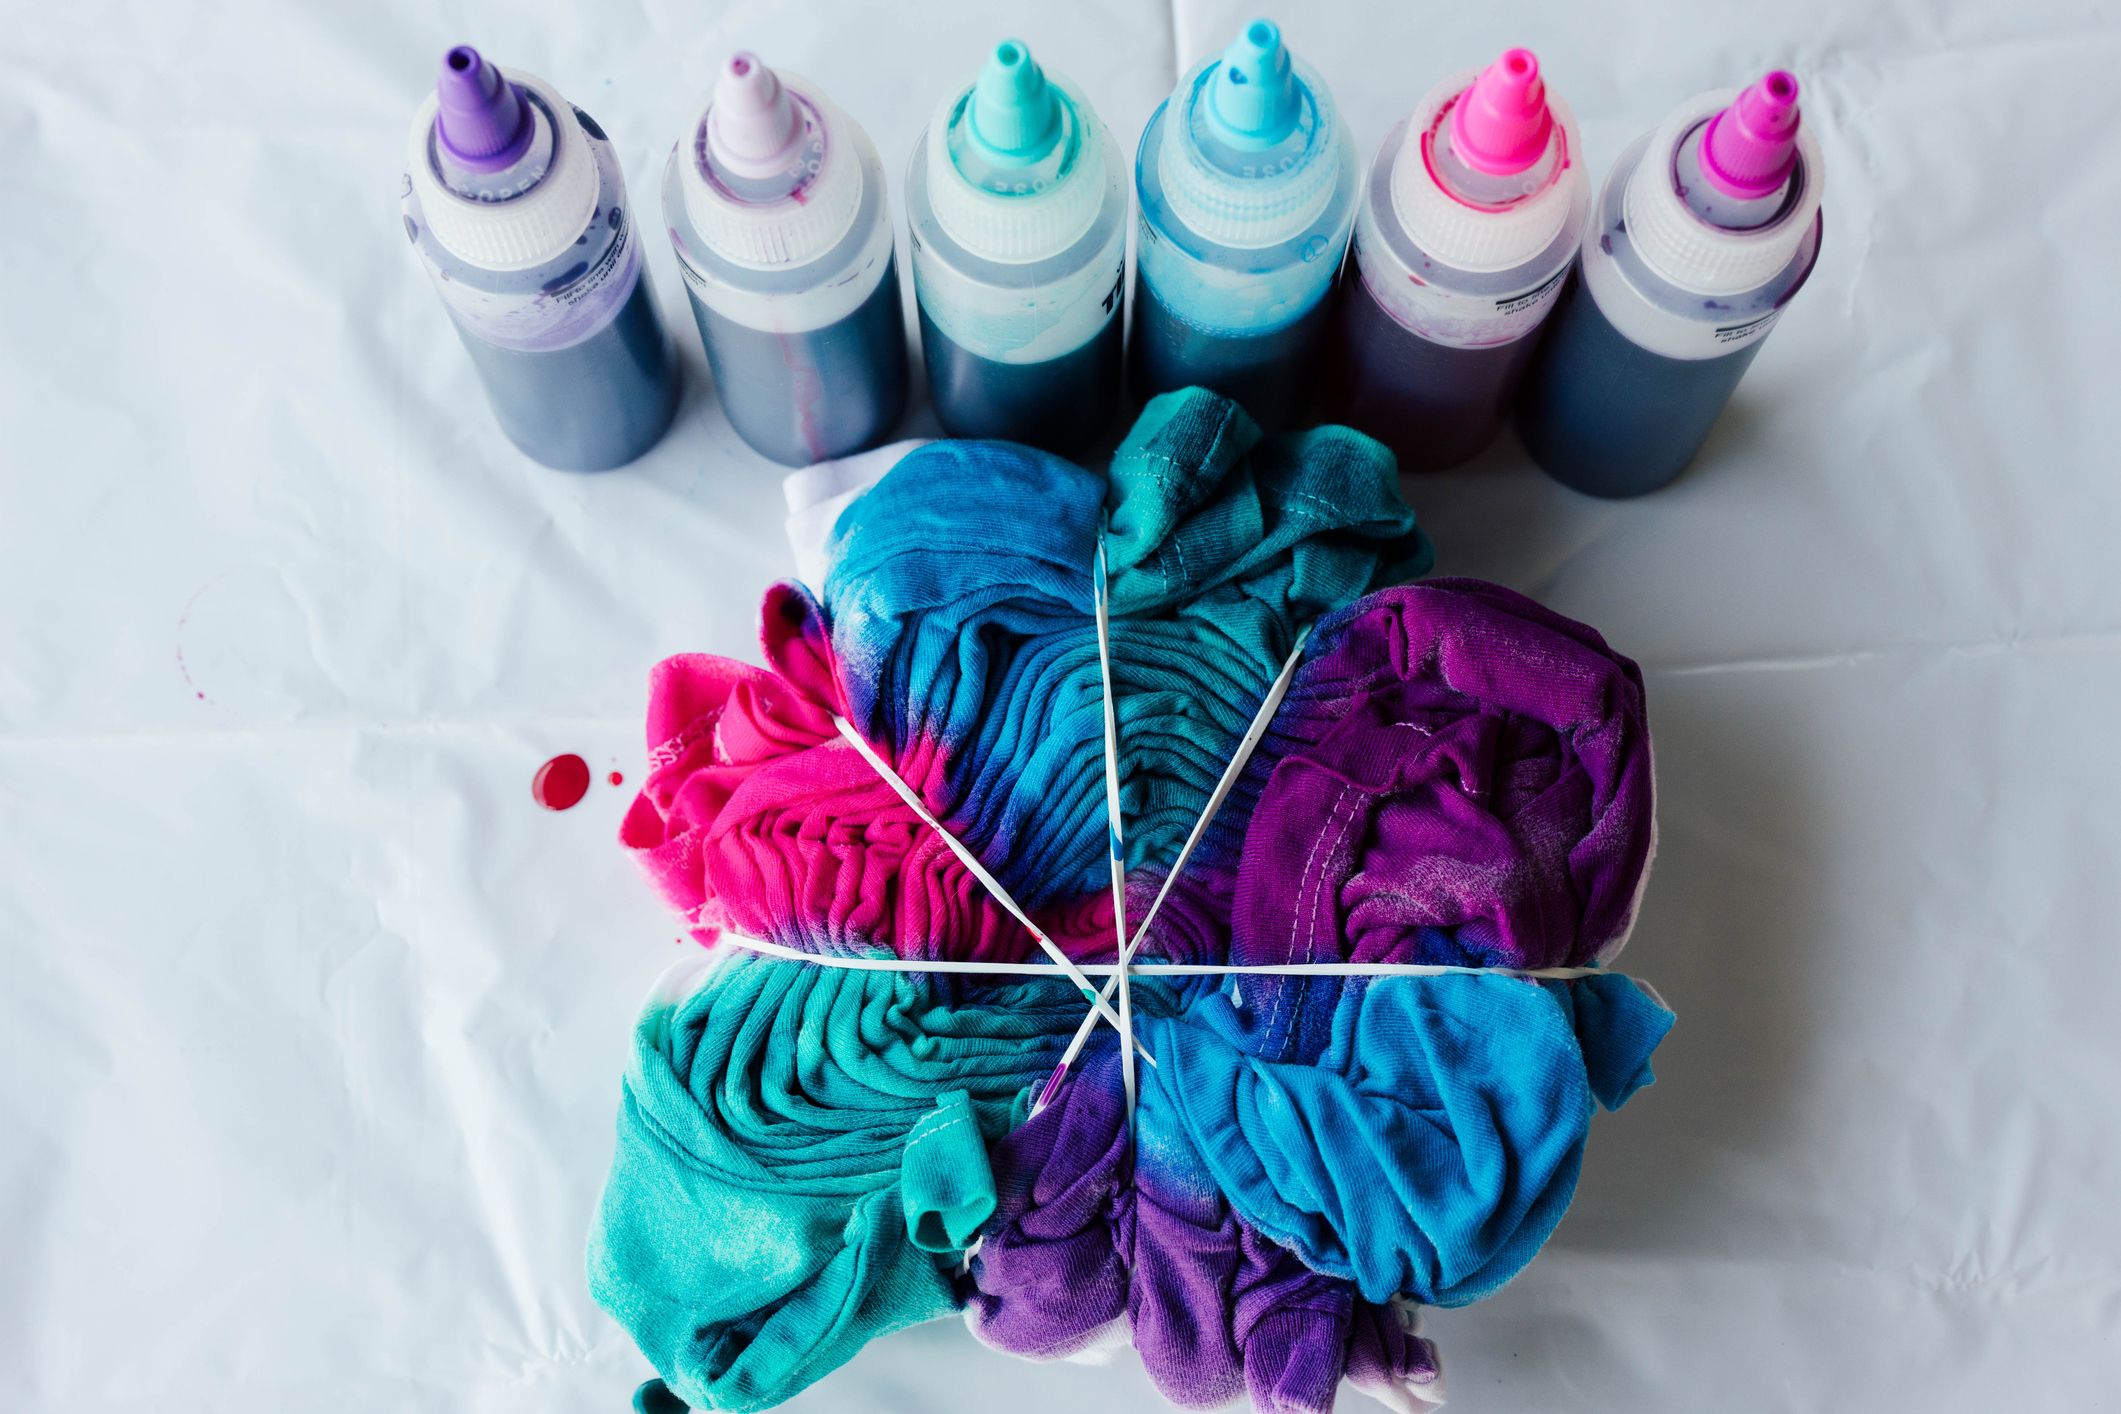 Tie Dye for Beginners: Get Started with Tulip Tie-Dye Kits